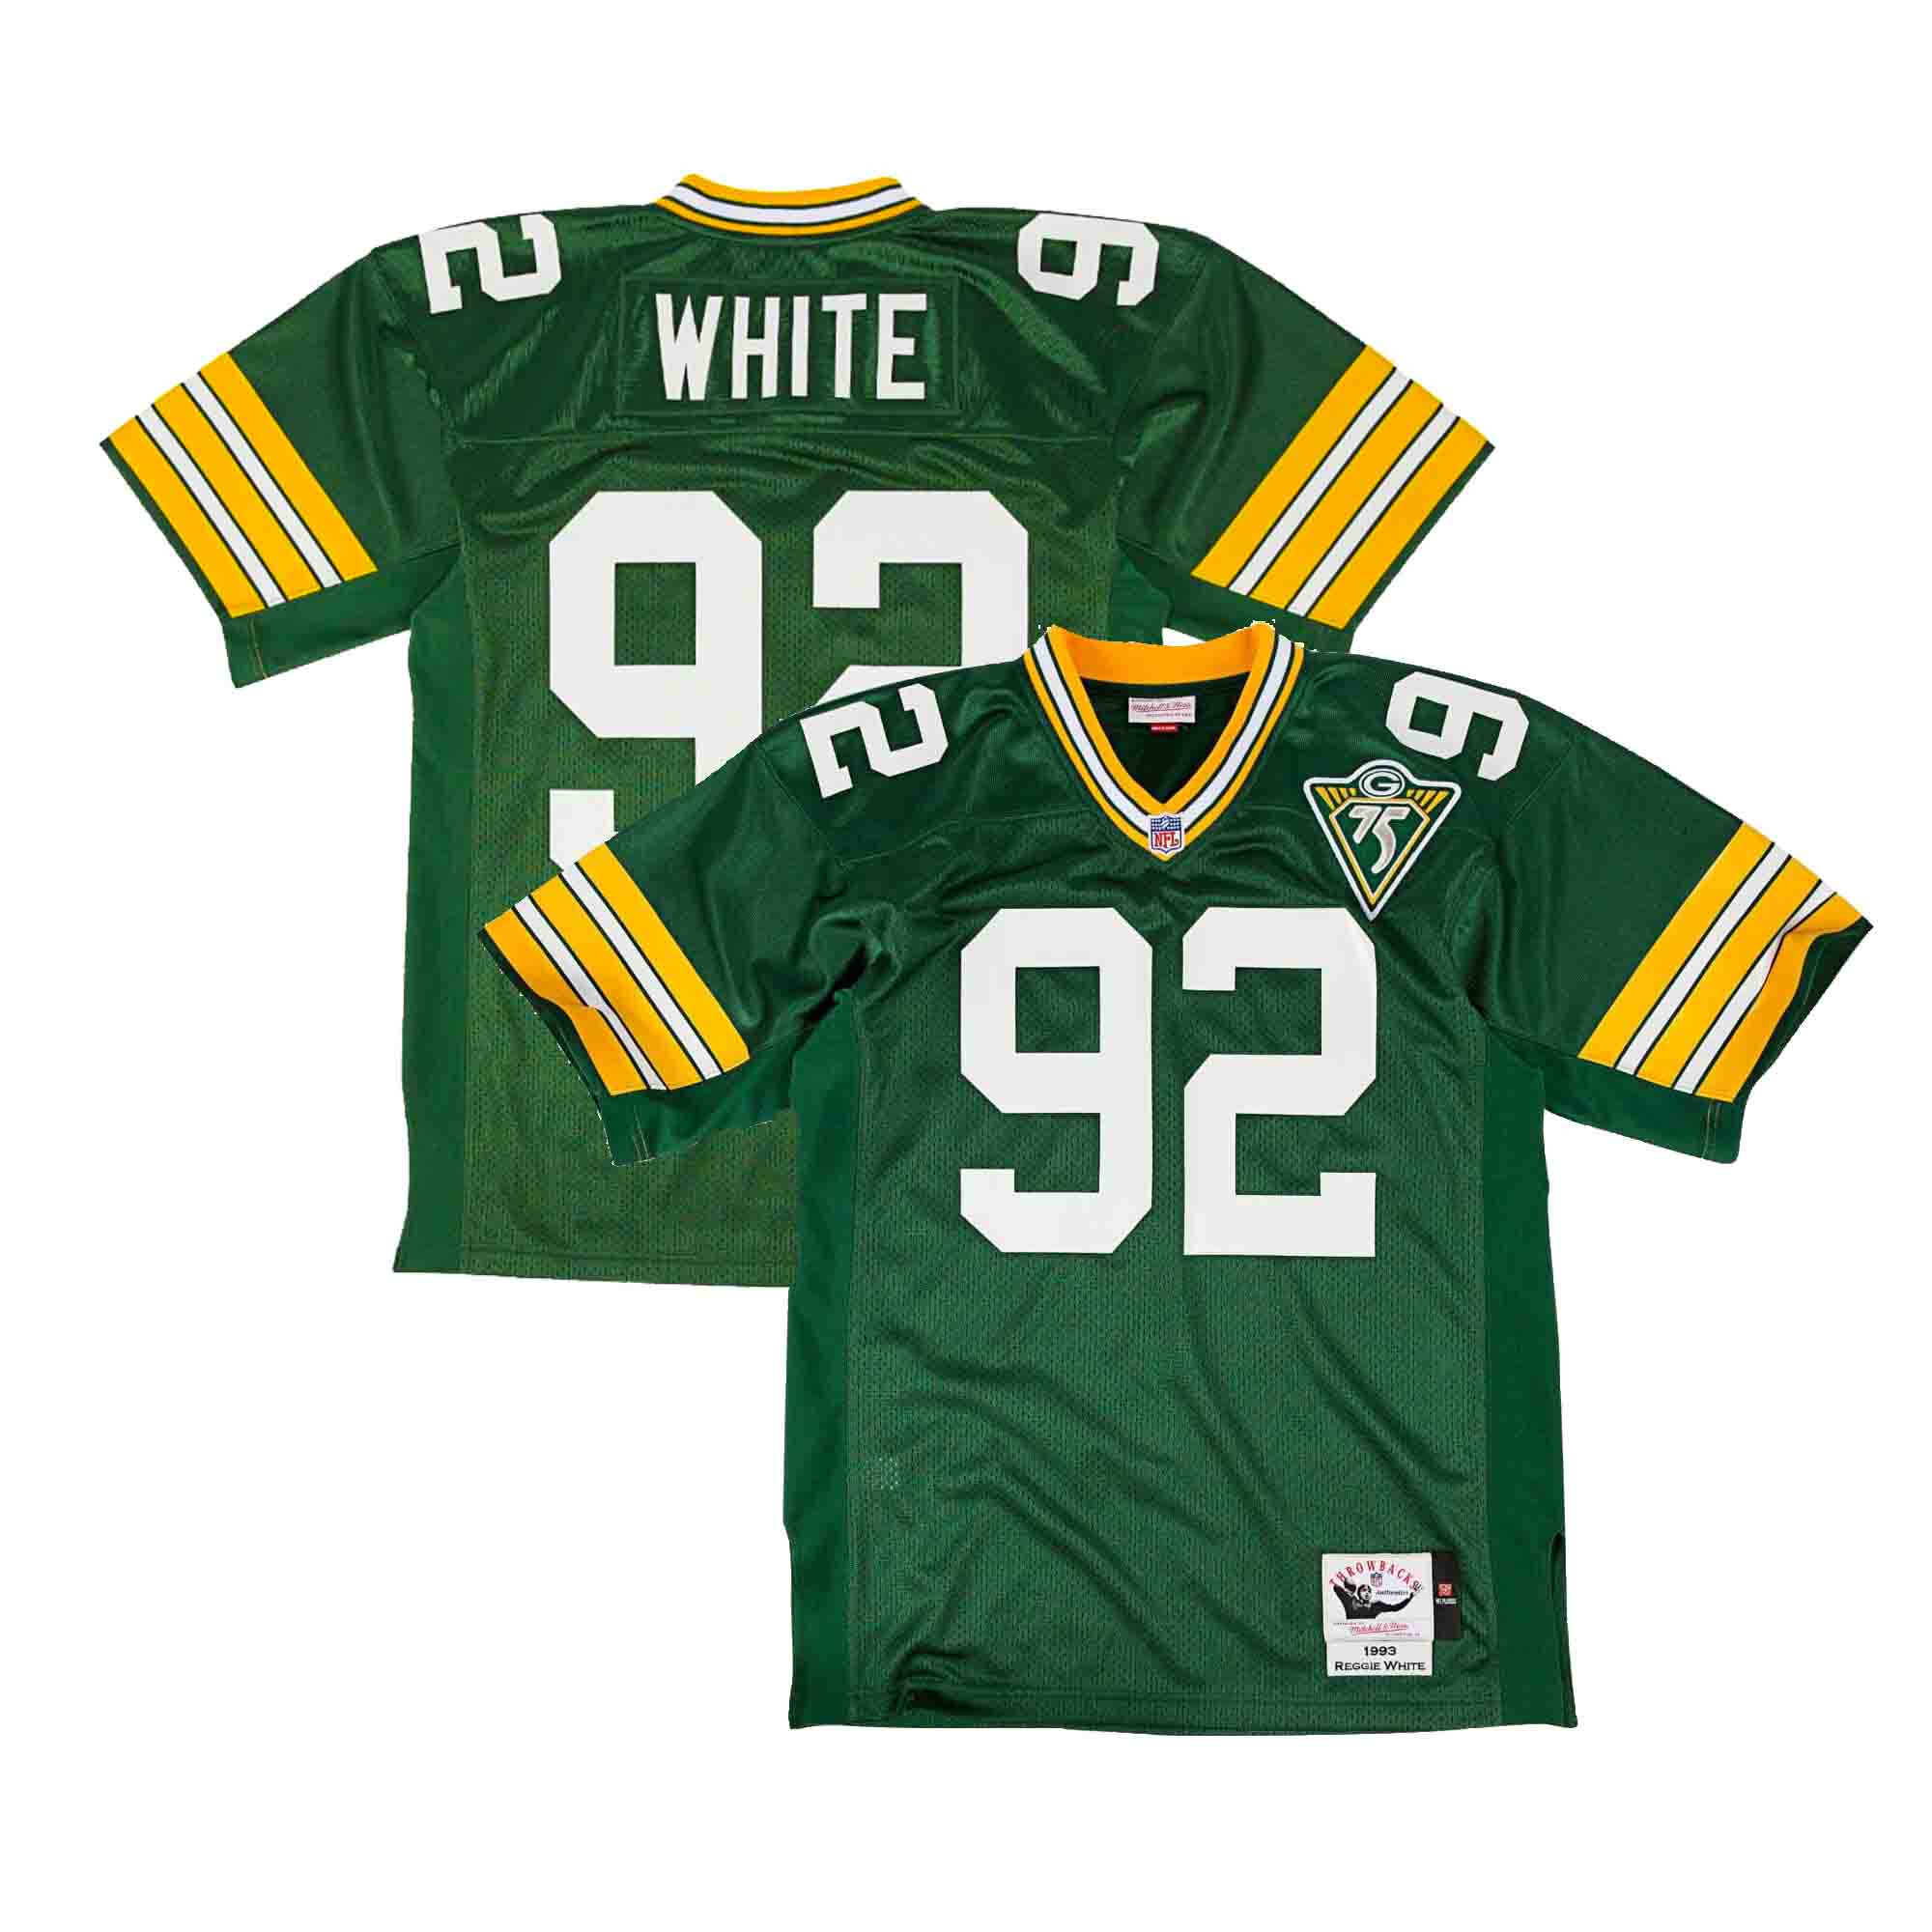 5xl packers jersey